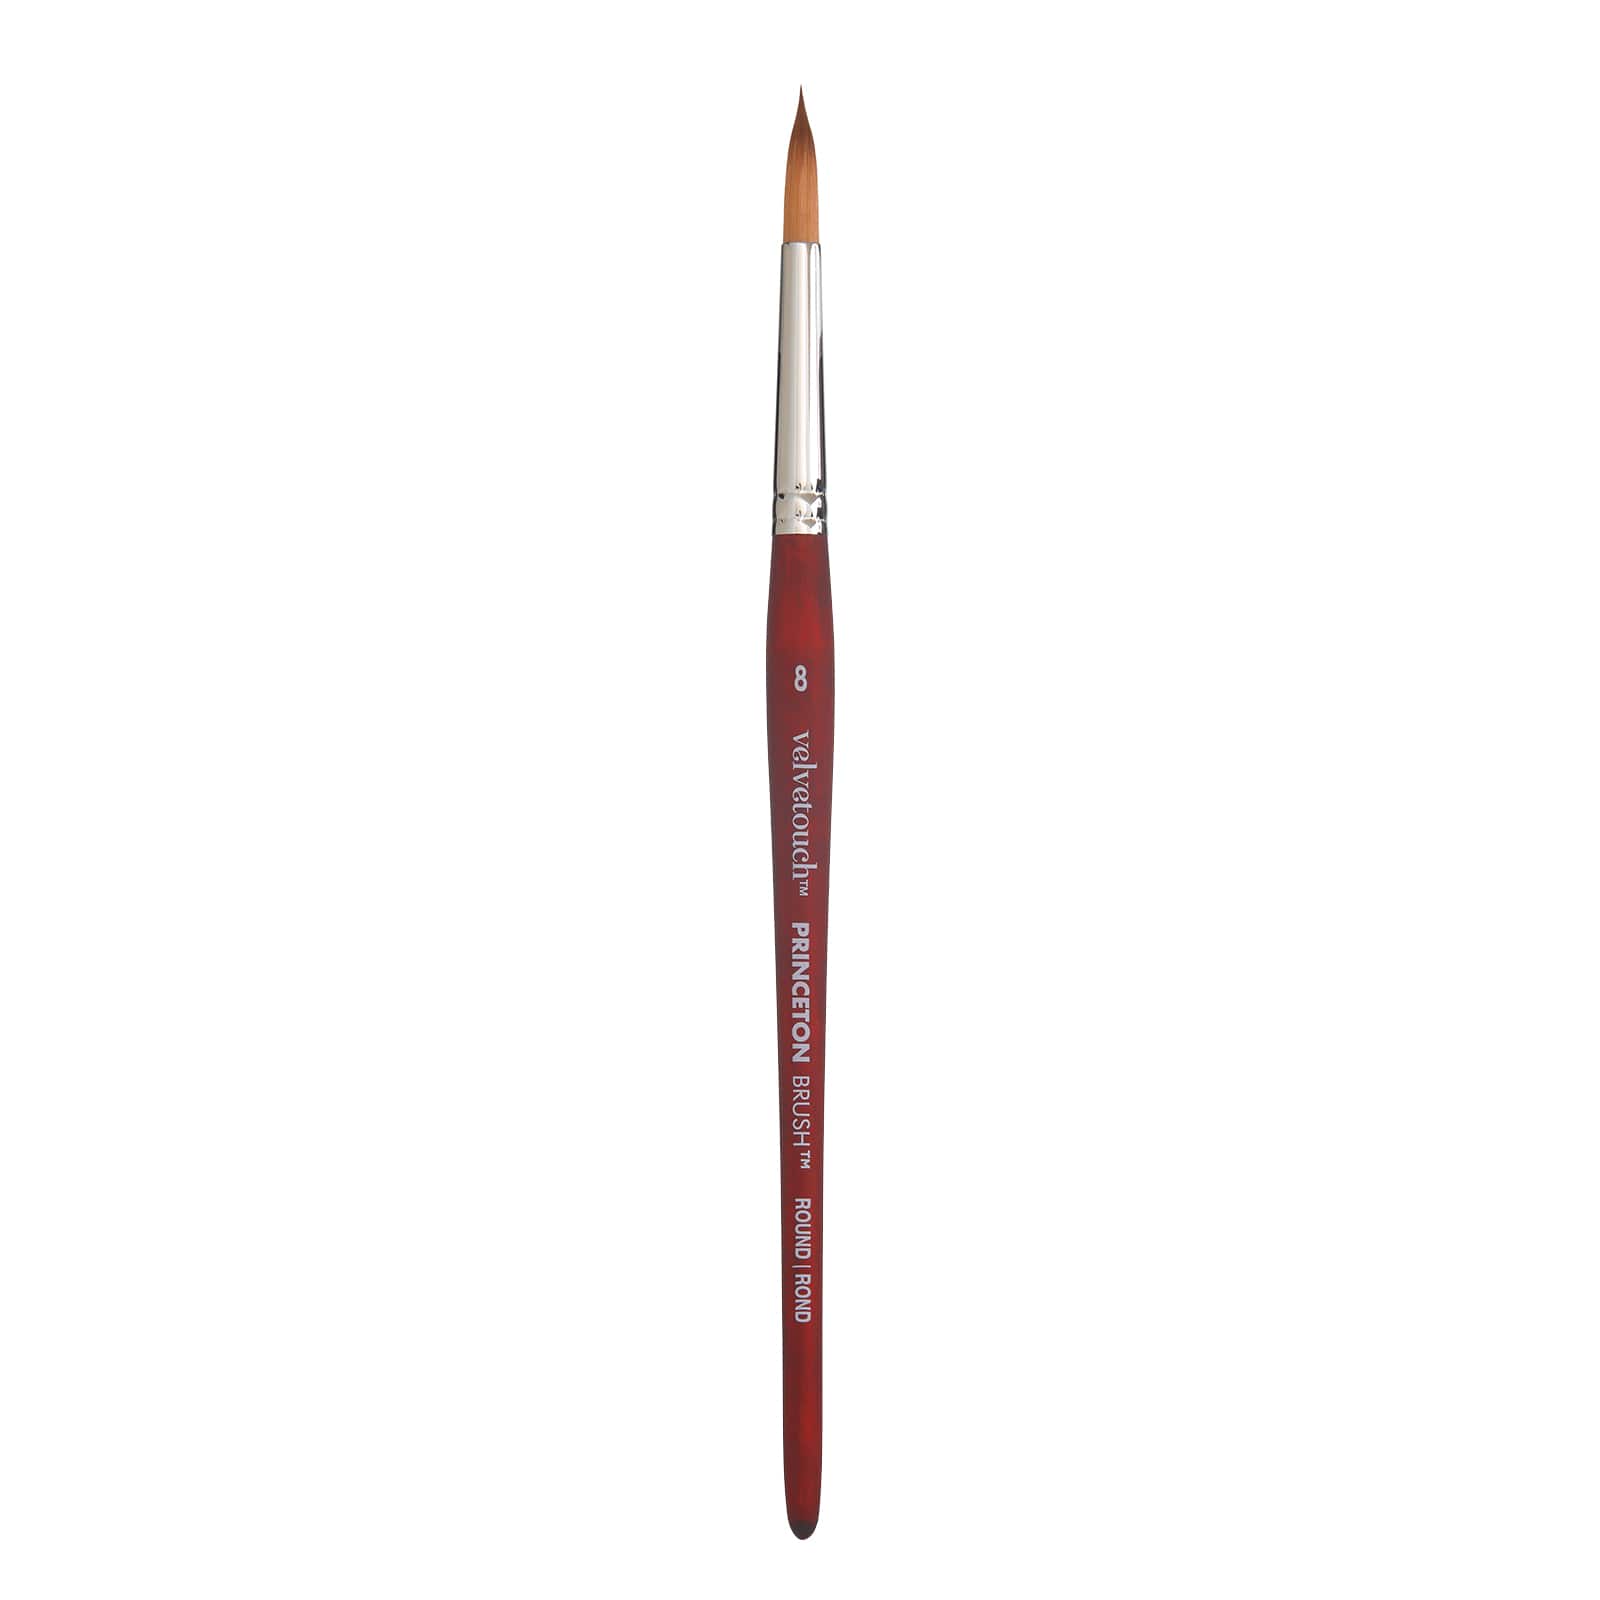 New York Central Oasis Synthetic Premium Brushes - Elite Professional Watercolor  Brushes for Artists, Painting, Students, Studios, & More!